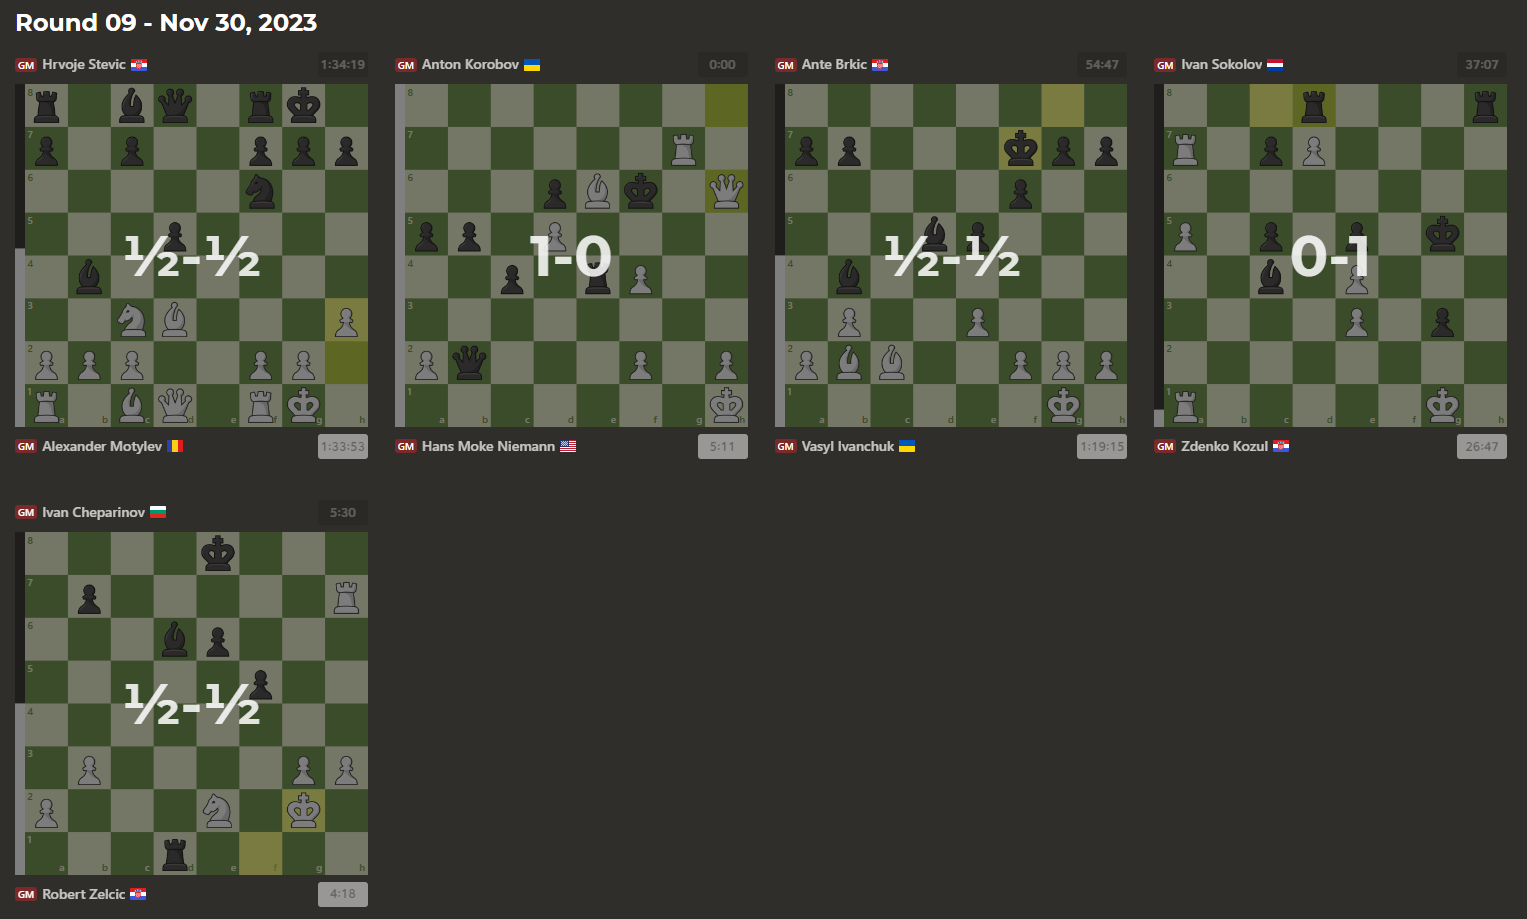 Hans Niemann on X: Very happy to win @tepesigeman with 5/7, a full point  ahead of the rest of the competition. This is my 2nd consecutive tournament  victory. My rating has risen